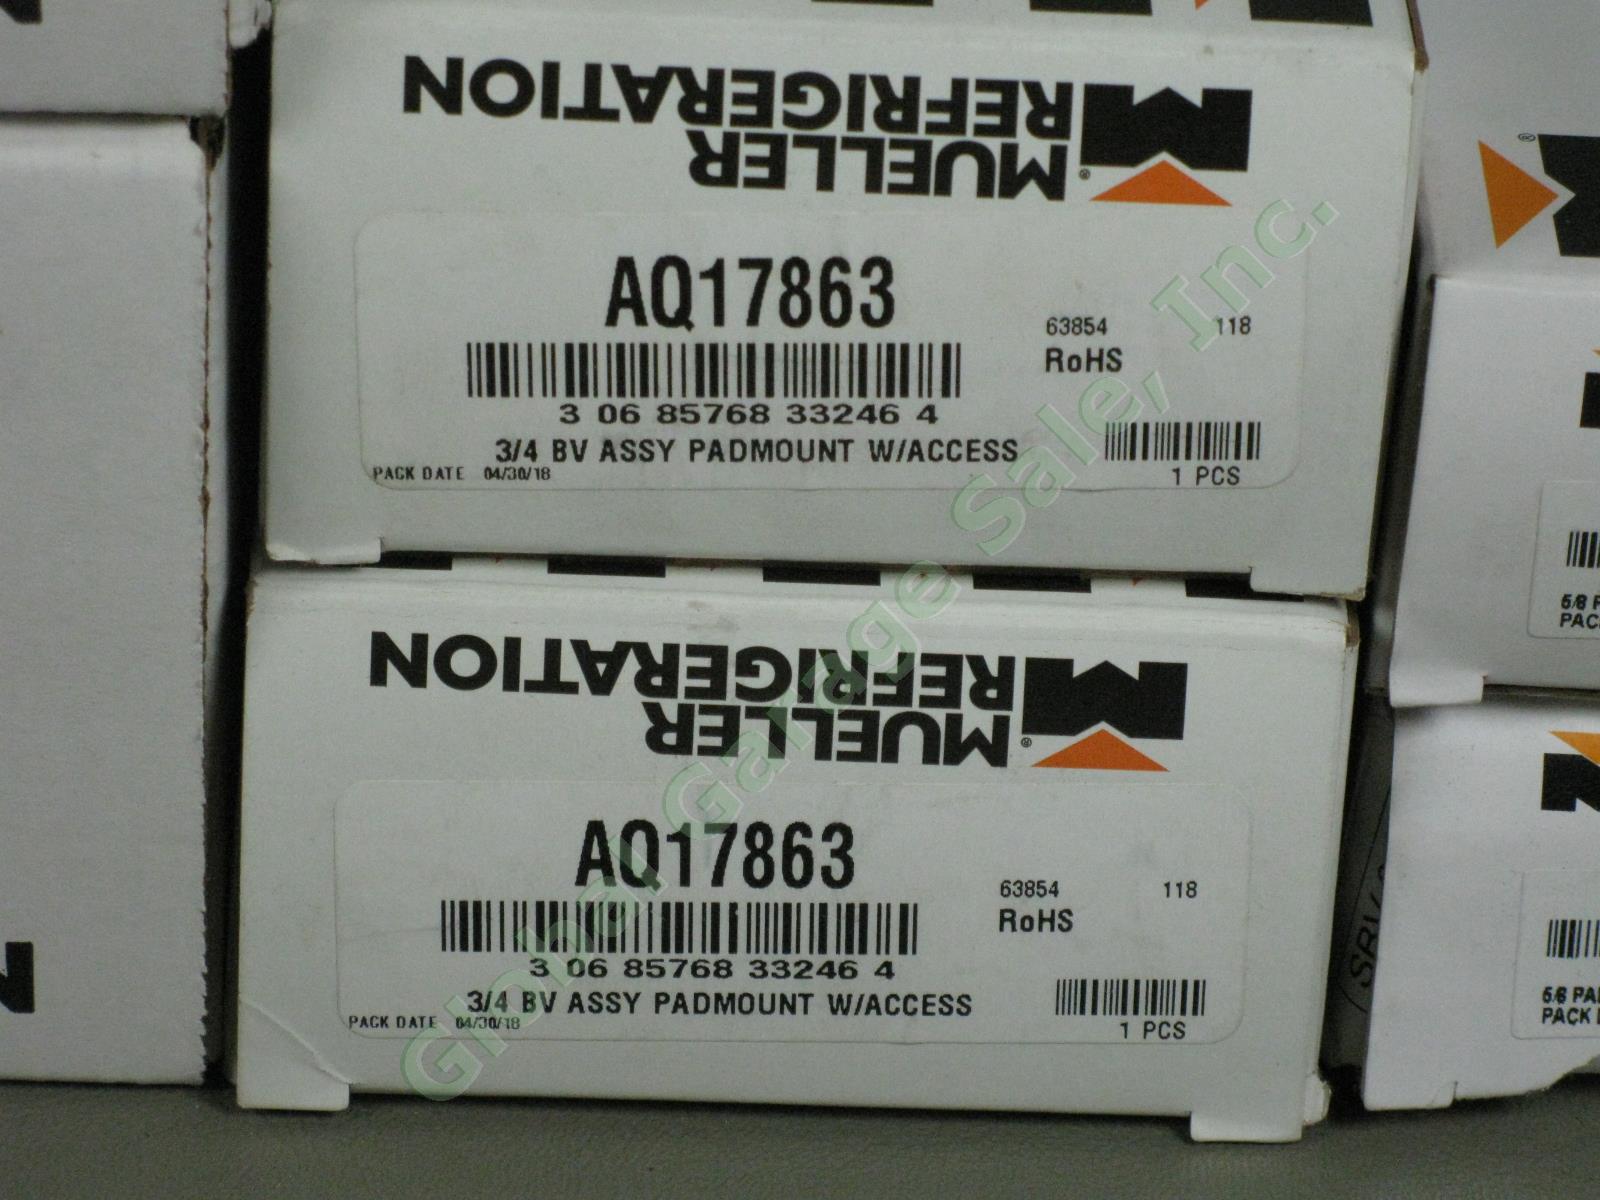 7 Mueller Refrigeration Cyclemaster Ball Valve LOT Collection with Access NIB NR 2